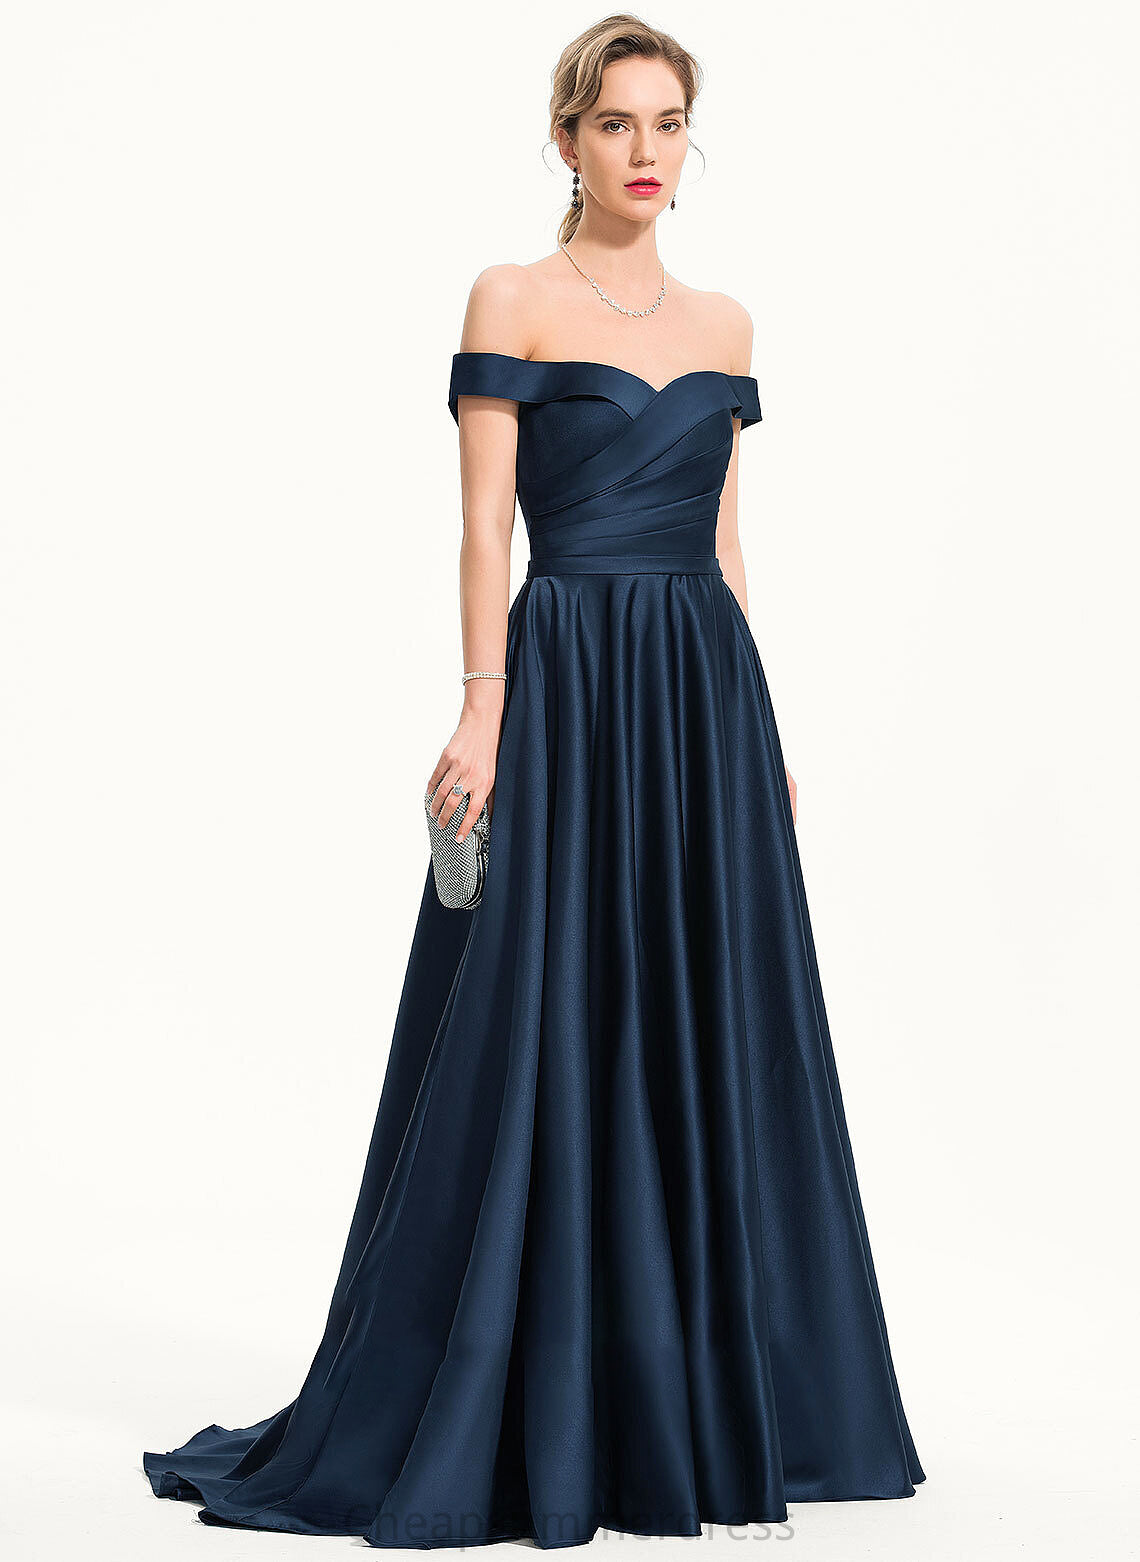 Off-the-Shoulder Satin With Sarahi Prom Dresses Train Pockets Sweep A-Line